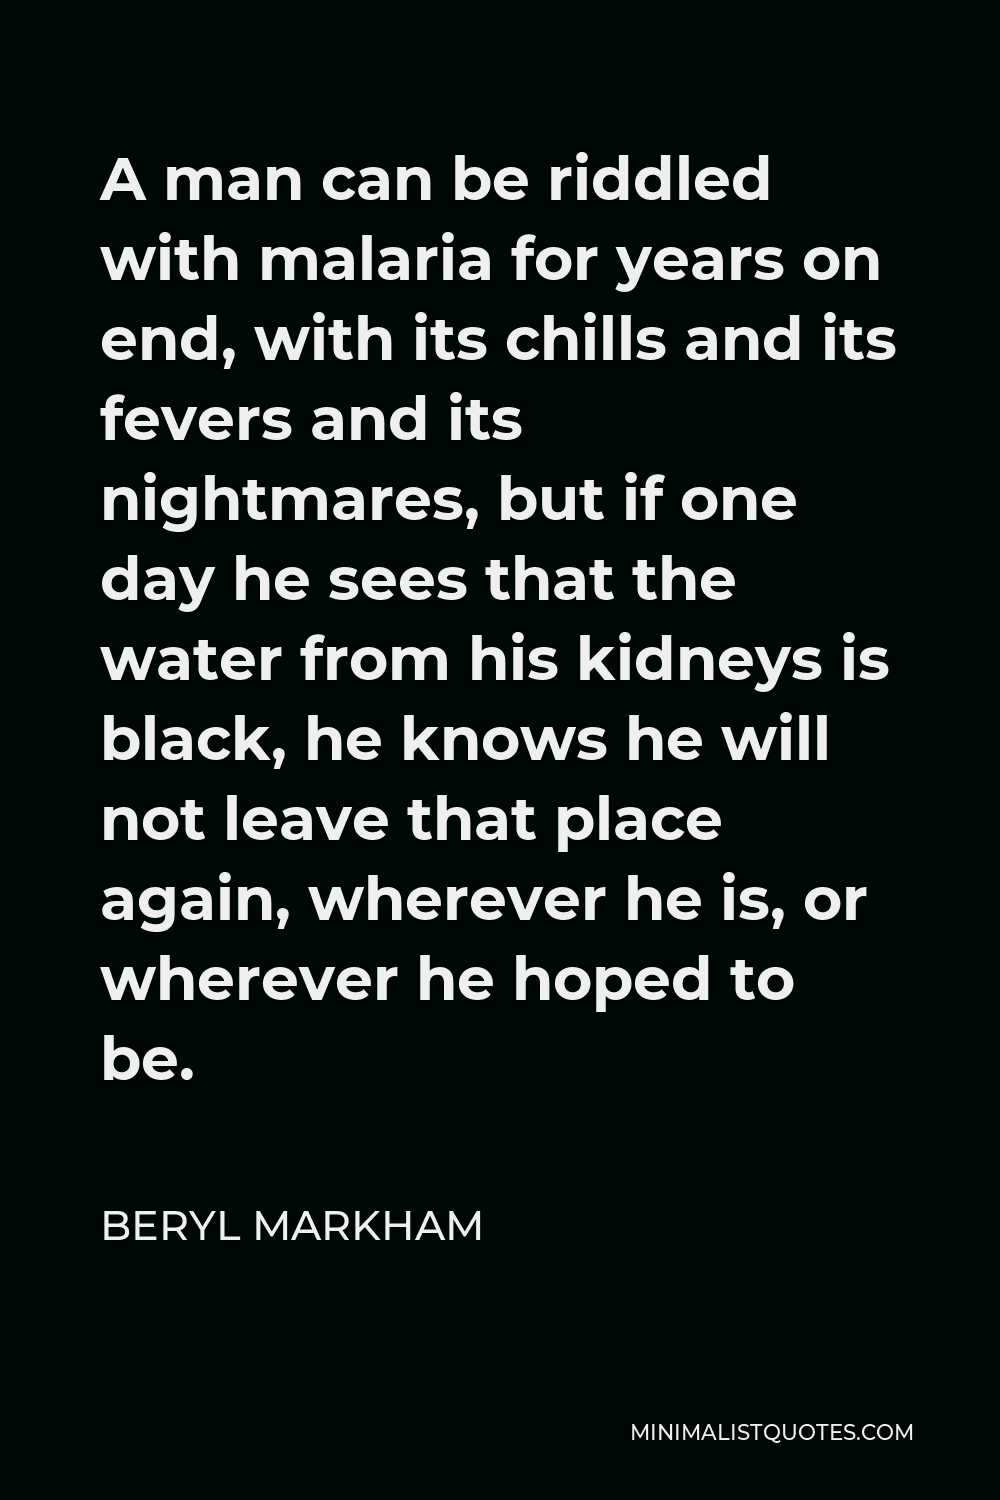 Beryl Markham Quote - A man can be riddled with malaria for years on end, with its chills and its fevers and its nightmares, but if one day he sees that the water from his kidneys is black, he knows he will not leave that place again, wherever he is, or wherever he hoped to be.